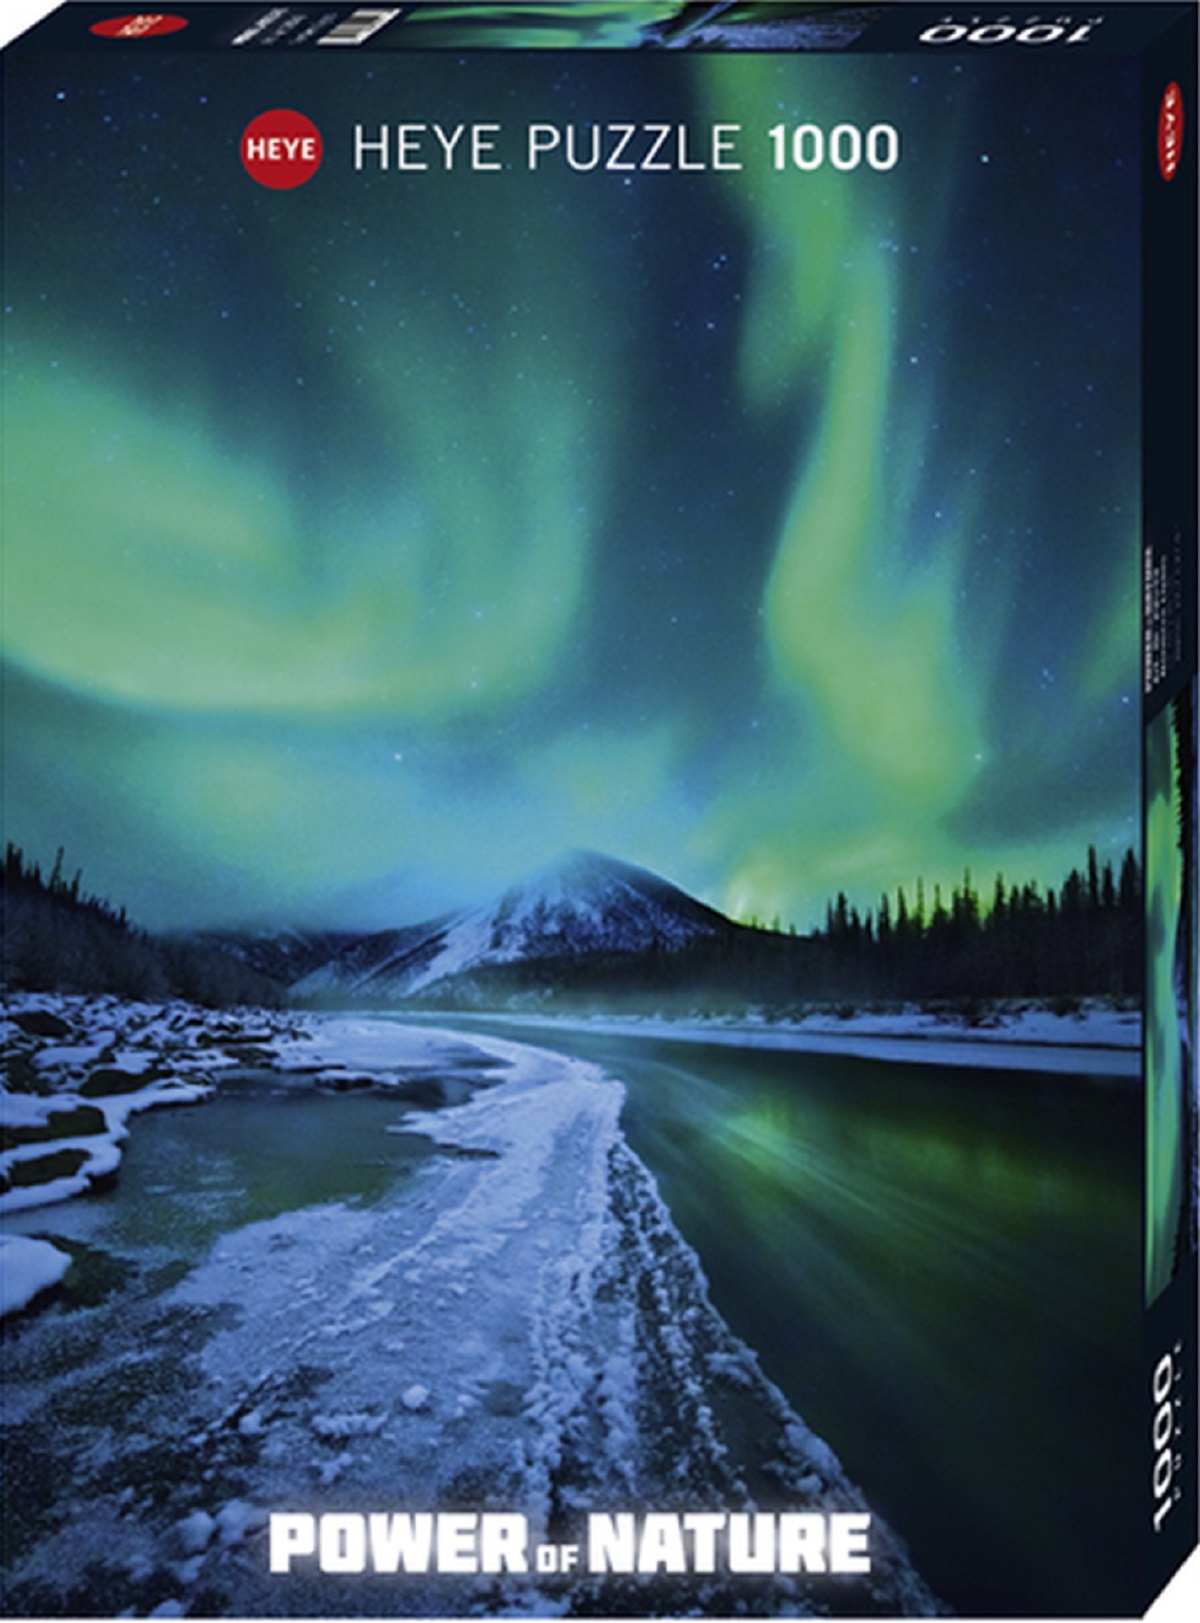 Puzzle 1000. Power of Nature: Northen Lights